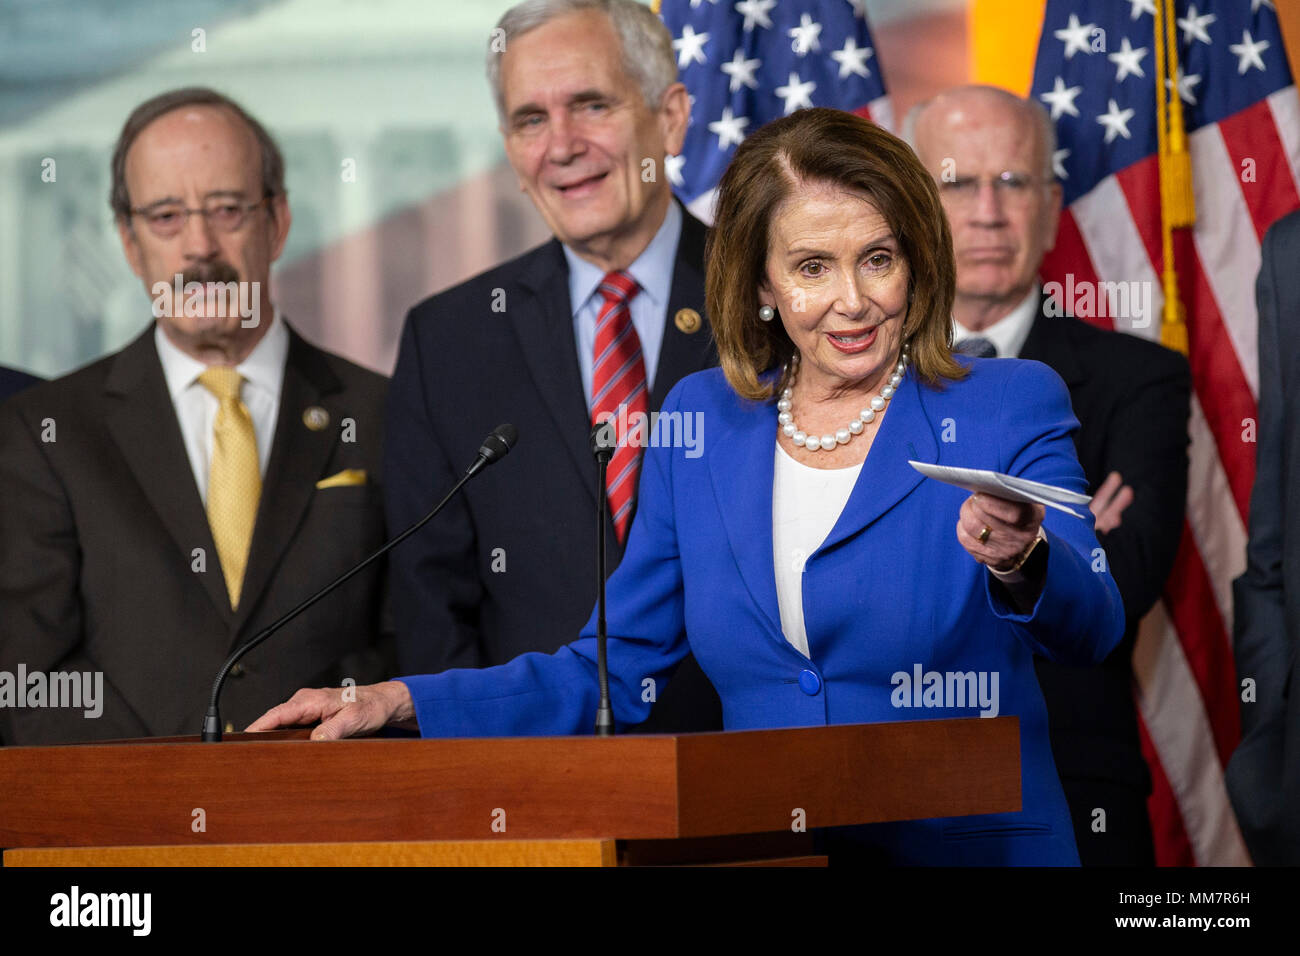 Washington, USA. 10th May, 2018. House of Representatives Democratic Leader Nancy Pelosi, Democrat of California, speaks during her weekly news conference on Capitol Hill in Washington, DC on May 10, 2018. Credit: The Photo Access/Alamy Live News Stock Photo